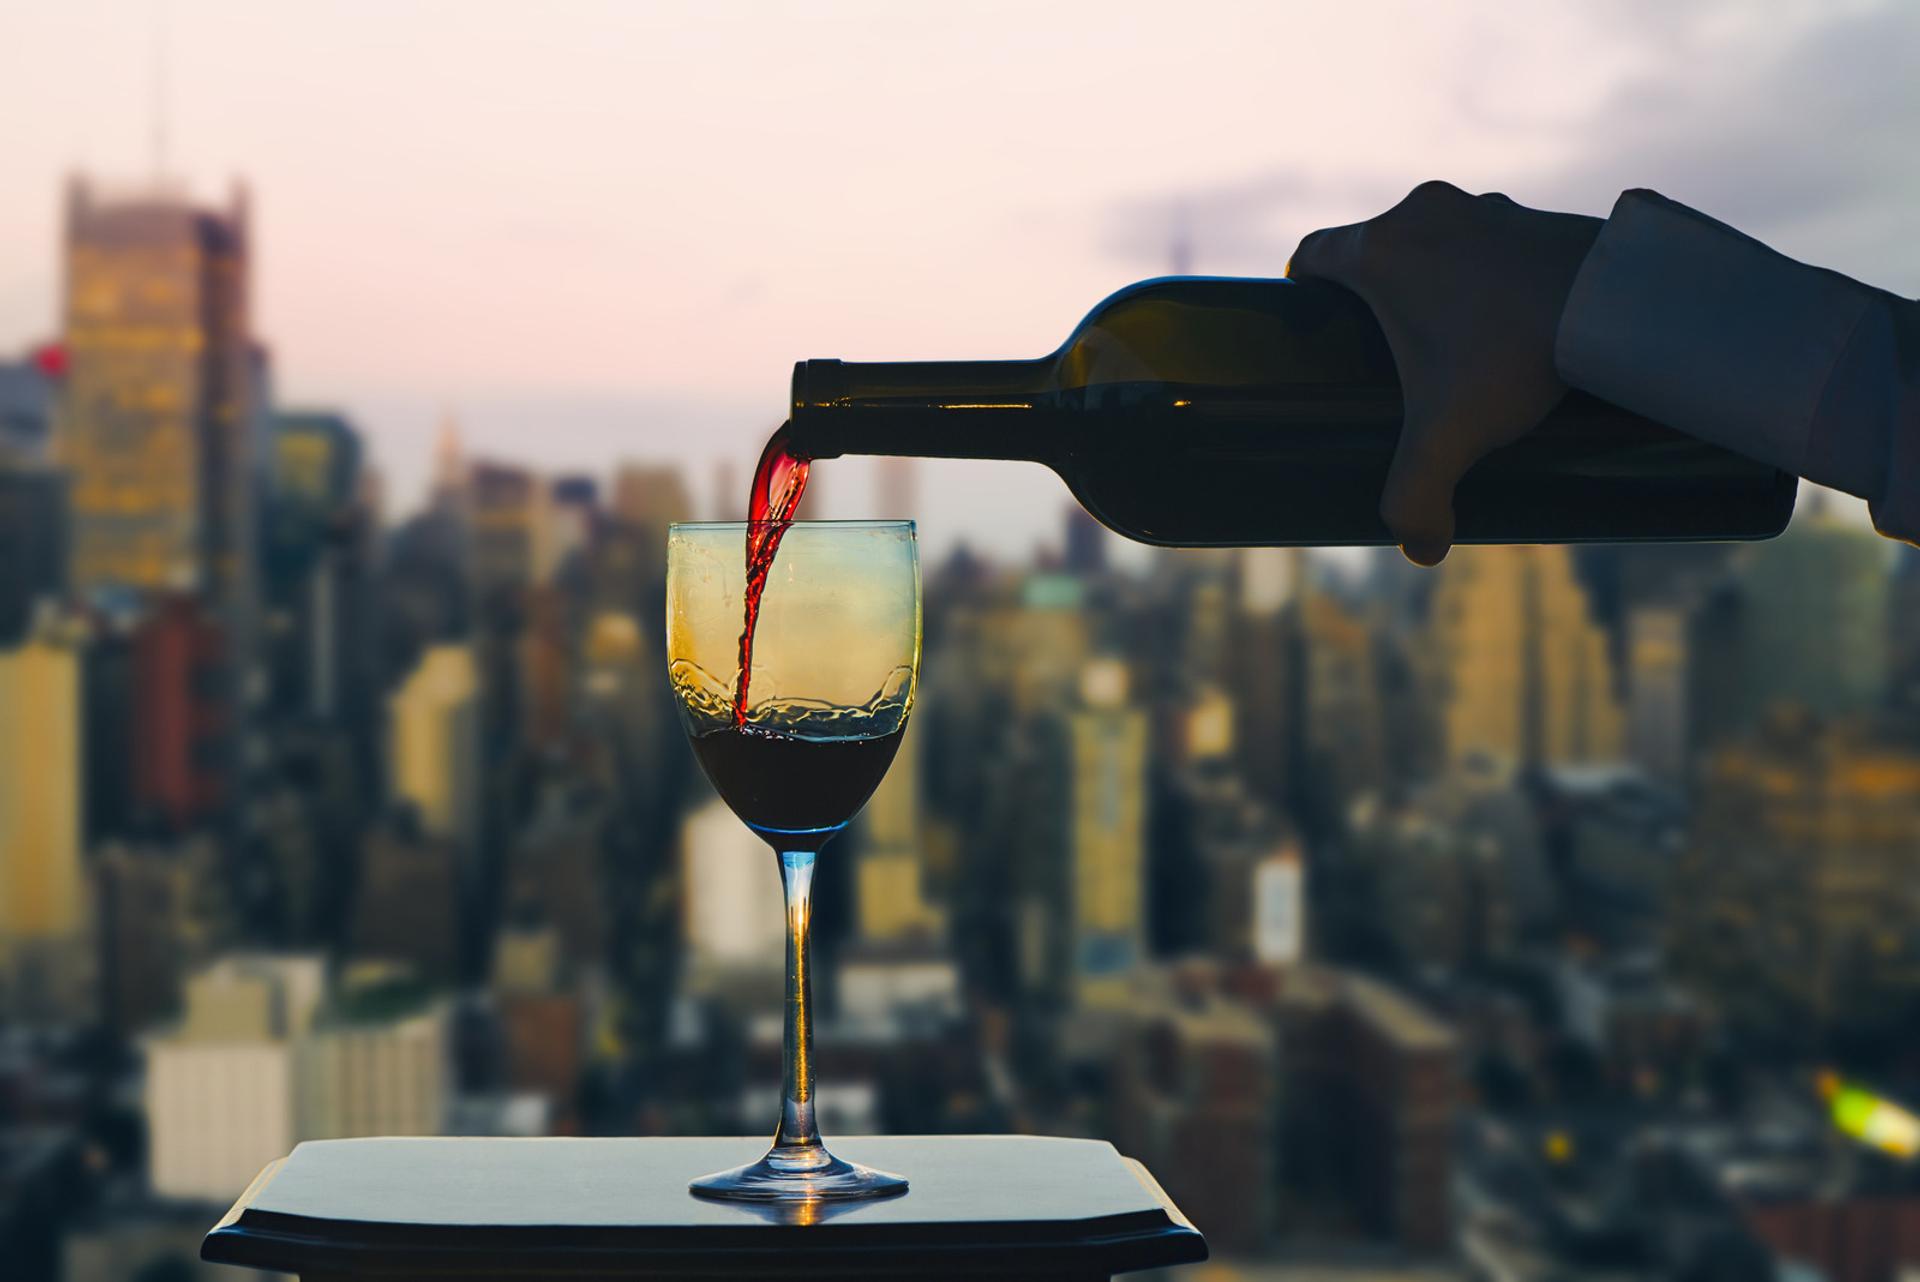 A server puring wine at a restaurant in NYC